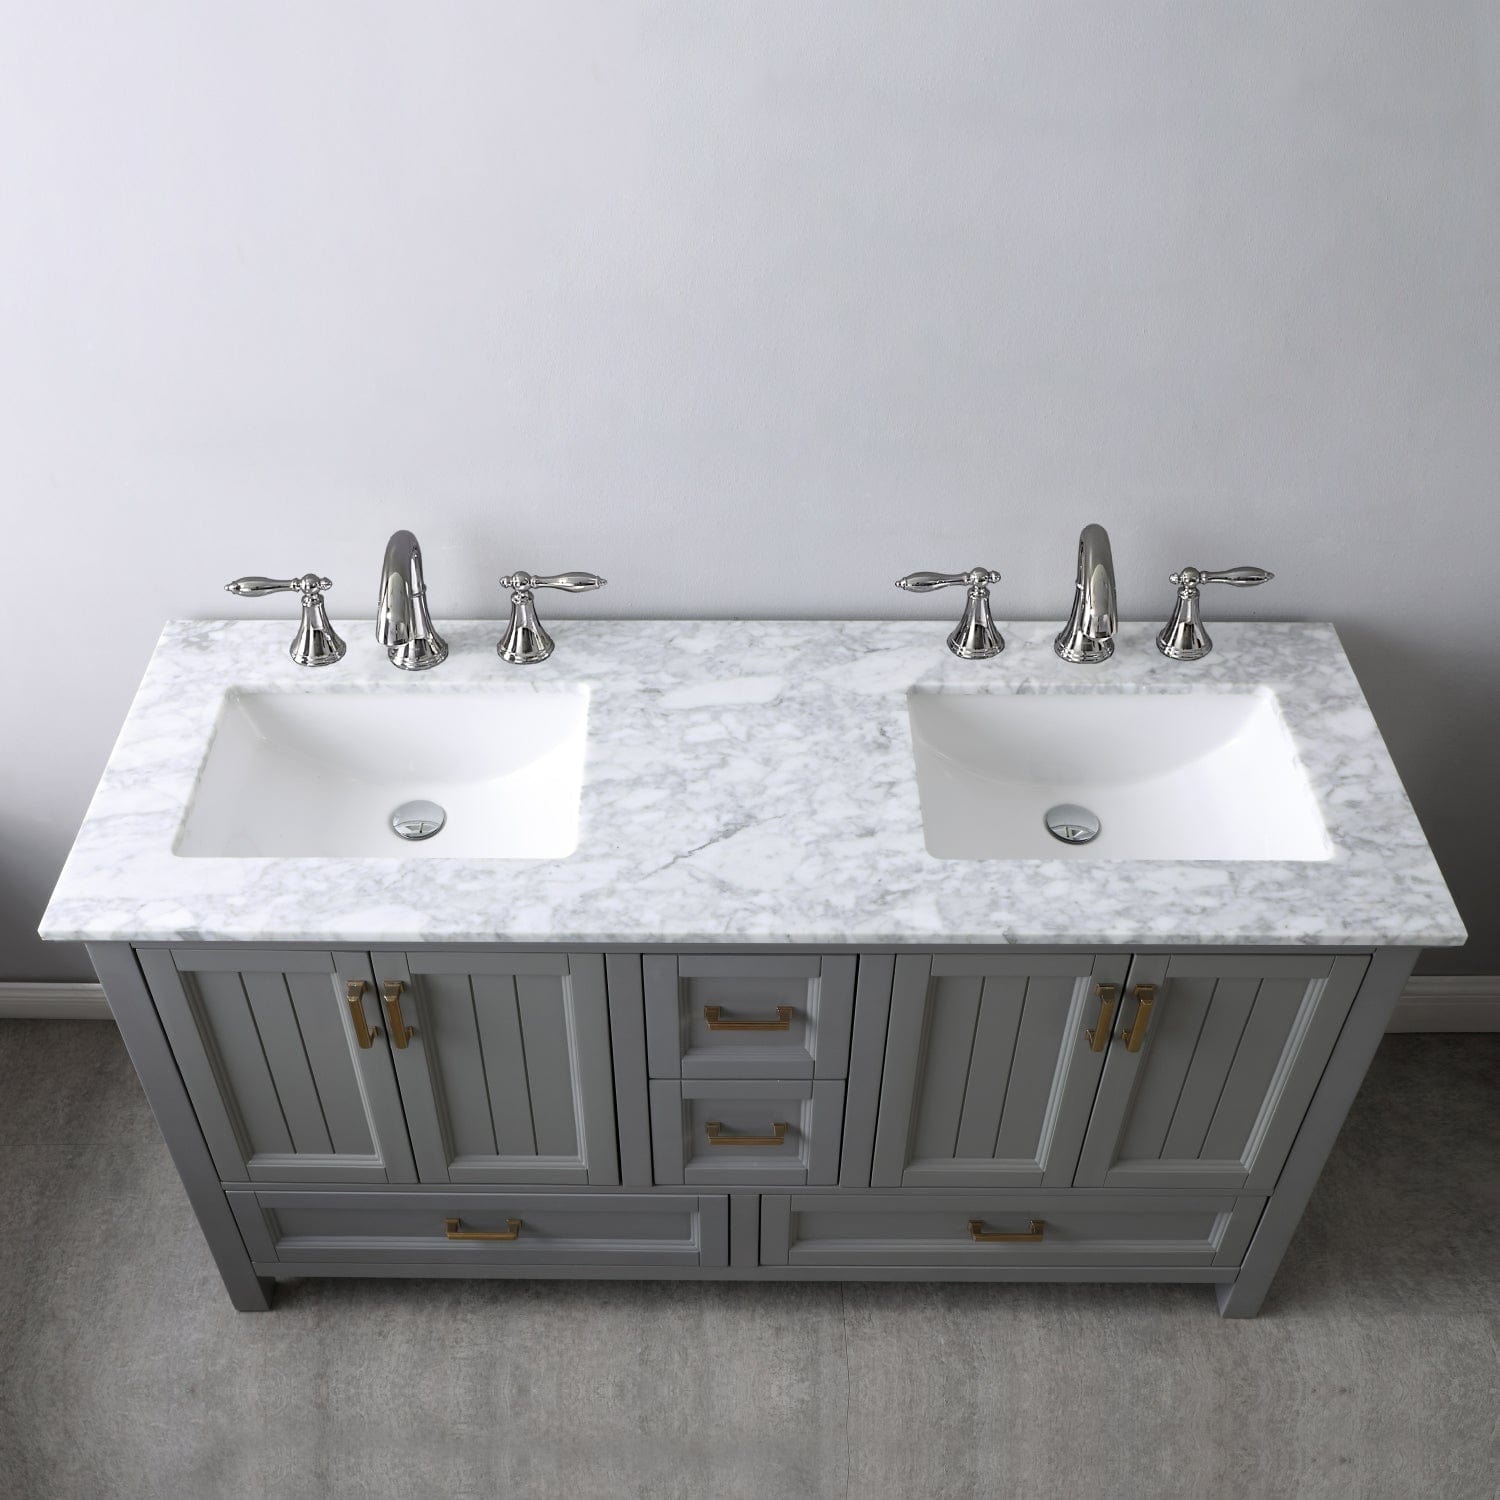 Altair Isla 60" Double Bathroom Vanity Set in Gray and Carrara White Marble Countertop without Mirror 538060-GR-CA-NM - Molaix631112970907Vanity538060-GR-CA-NM